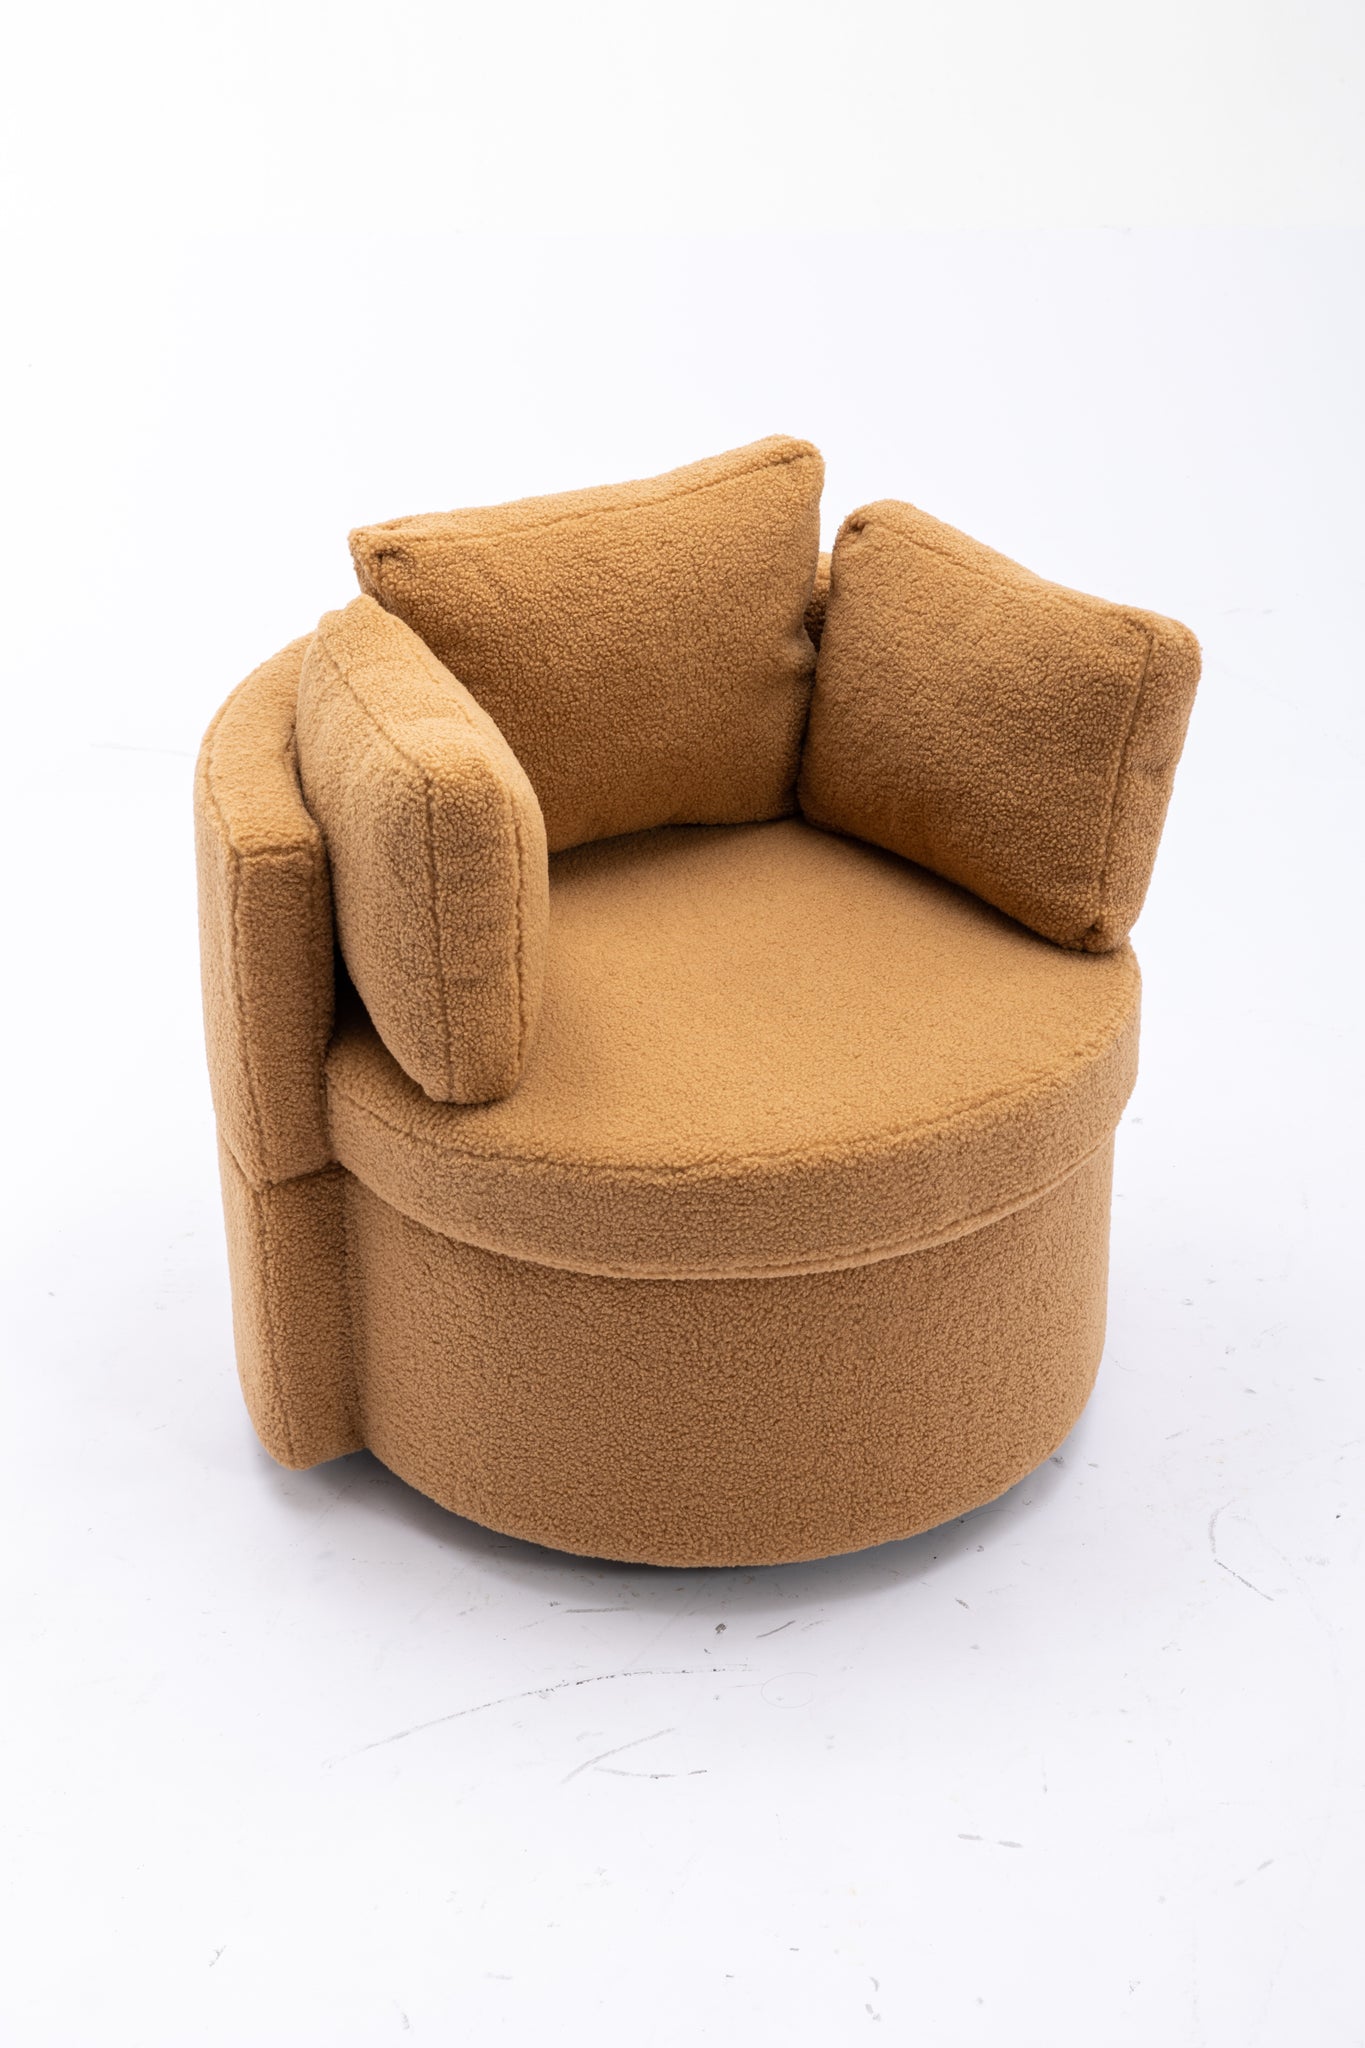 Swivel And Storage Chair For Living Room,Brown brown-white-primary living space-modern-foam-wool